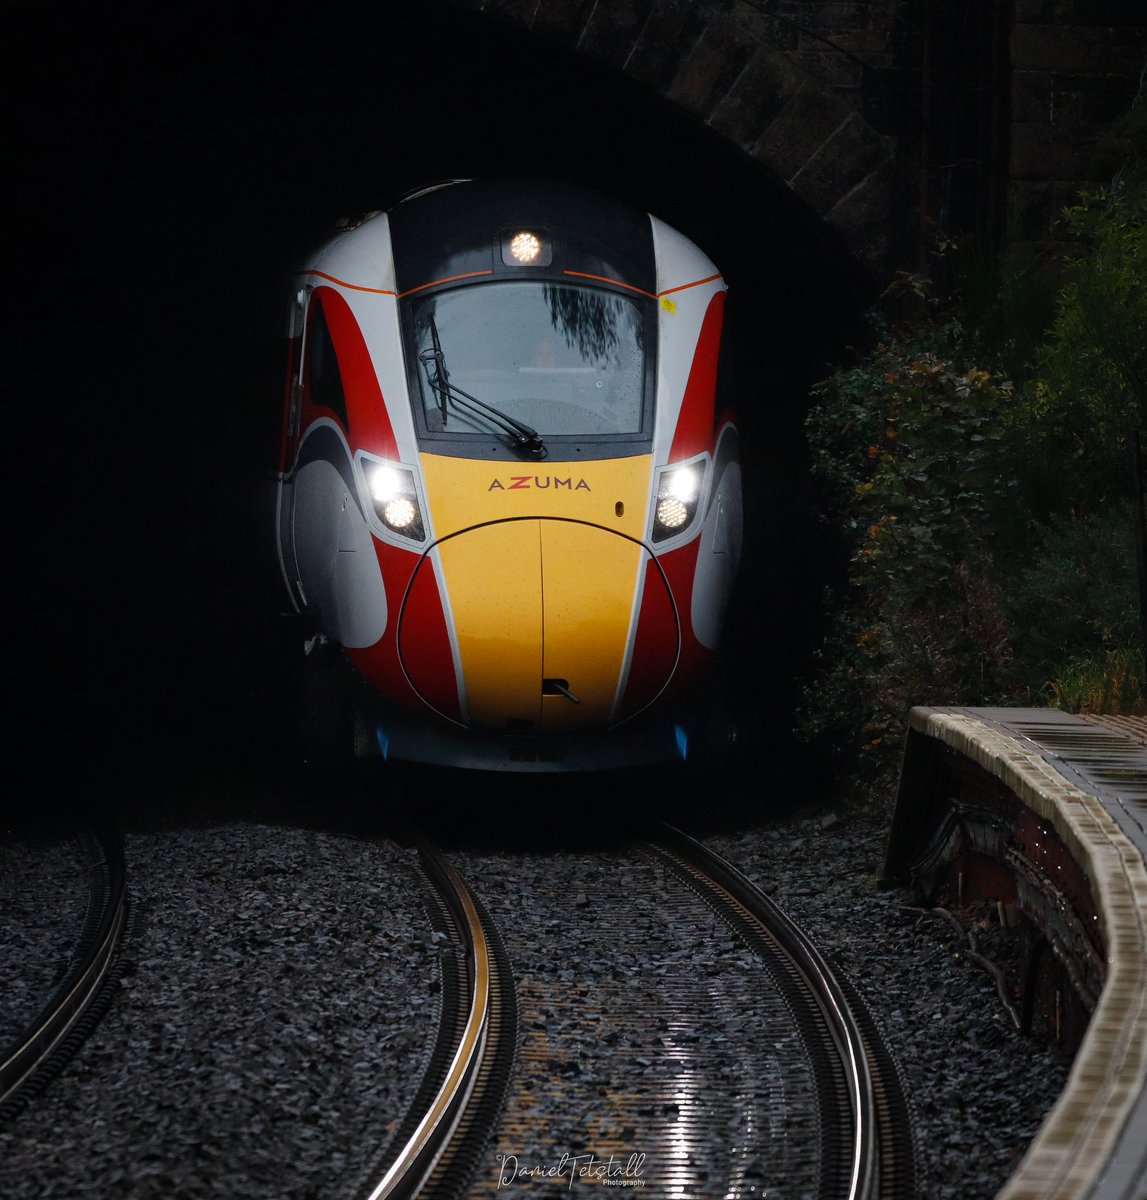 This afternoon's @LNER #Azuma emerging from the North Queensferry Tunnel on it's way down the ECML from Aberdeen #northqueensferry #fife #hitachi